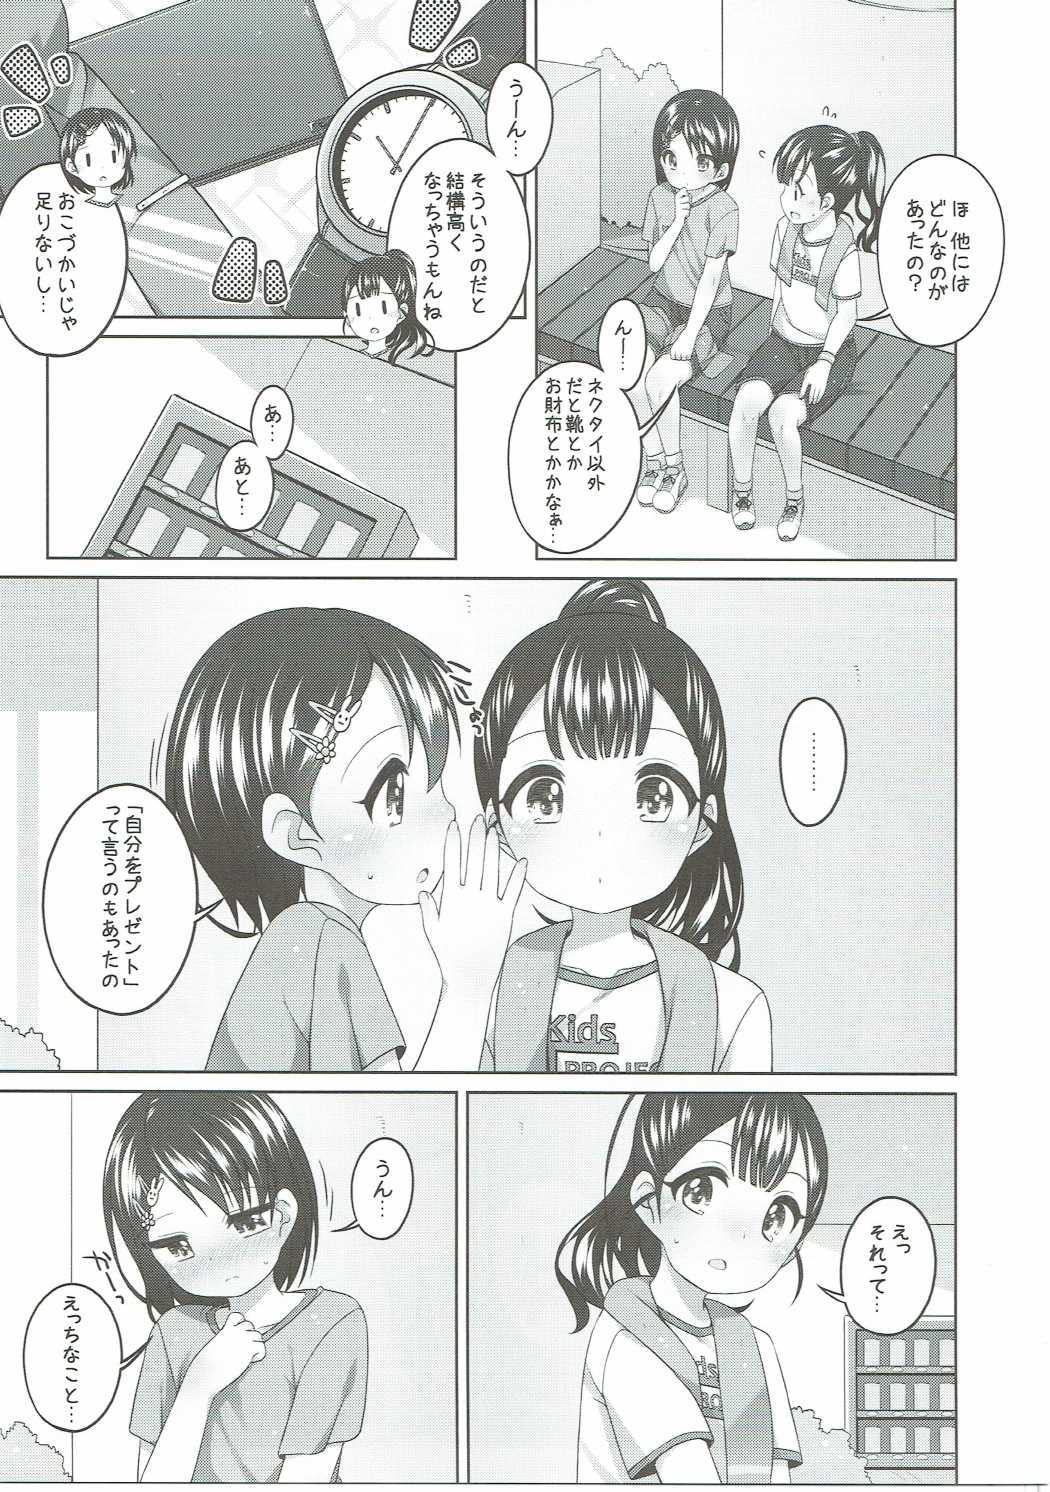 Punk Ganbare! Chie-chan - The idolmaster Perrito - Page 6